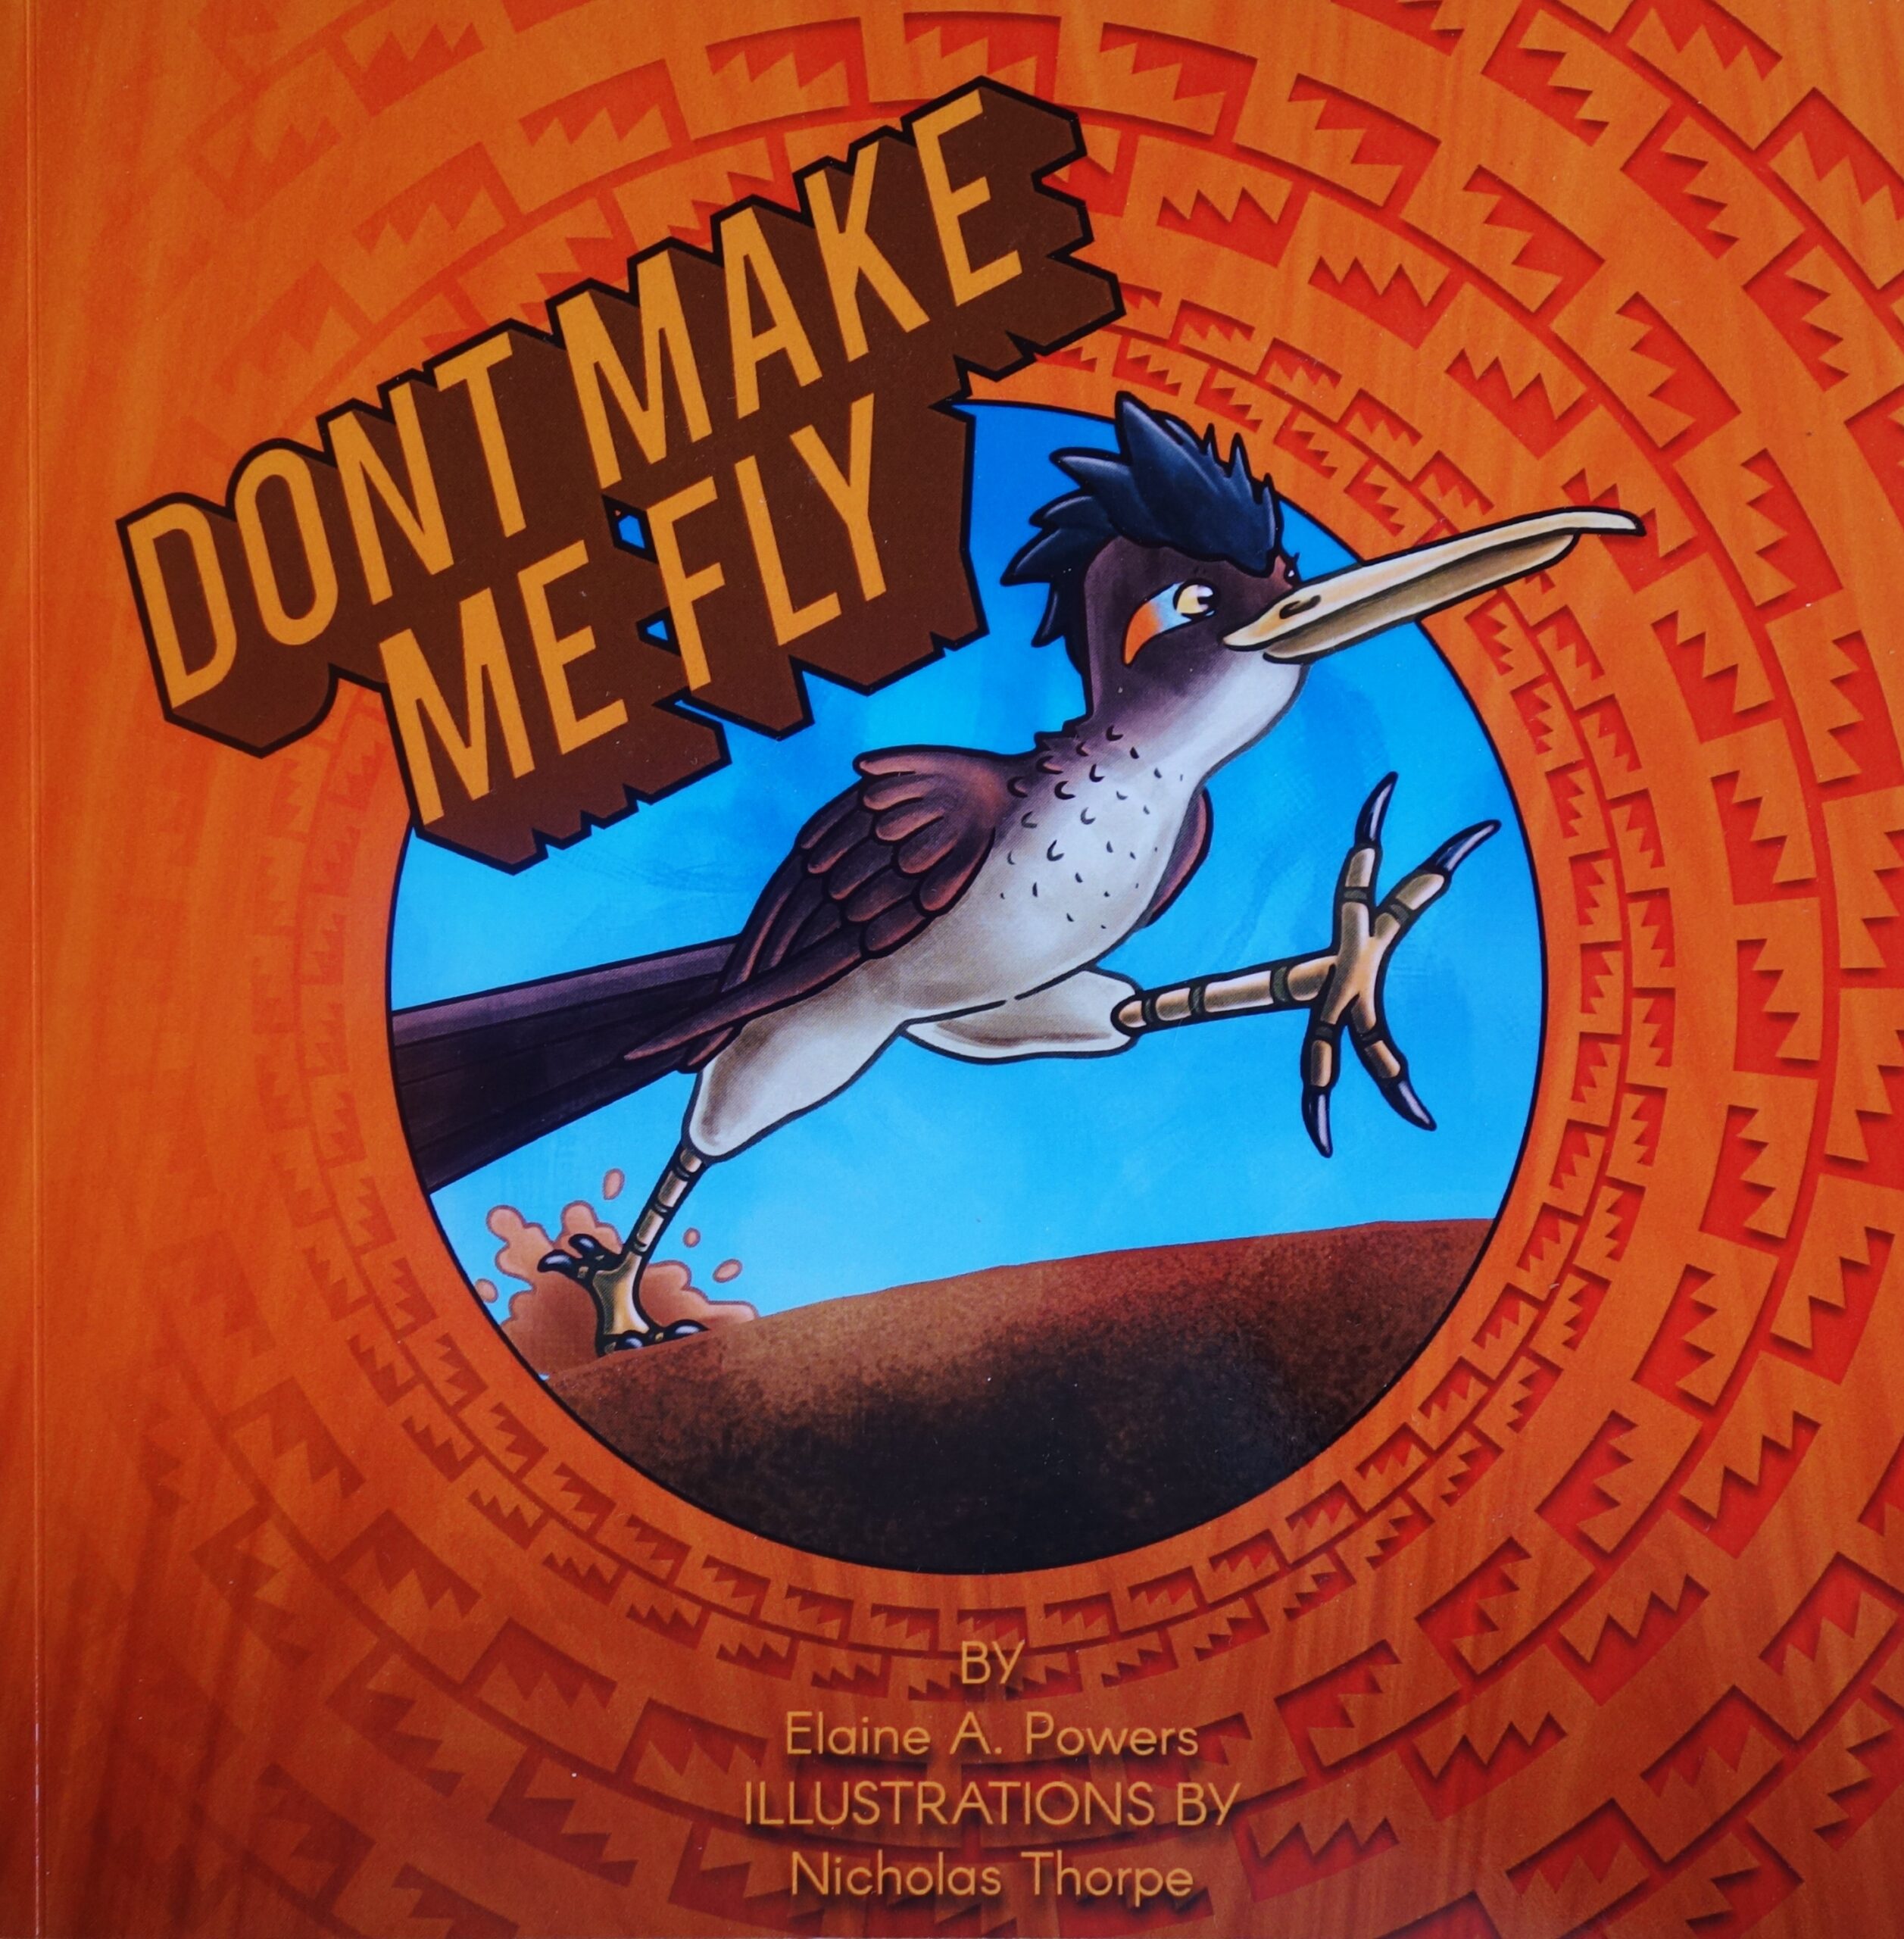 A copper colored book cover featuring an illustration of a Roadrunner bird